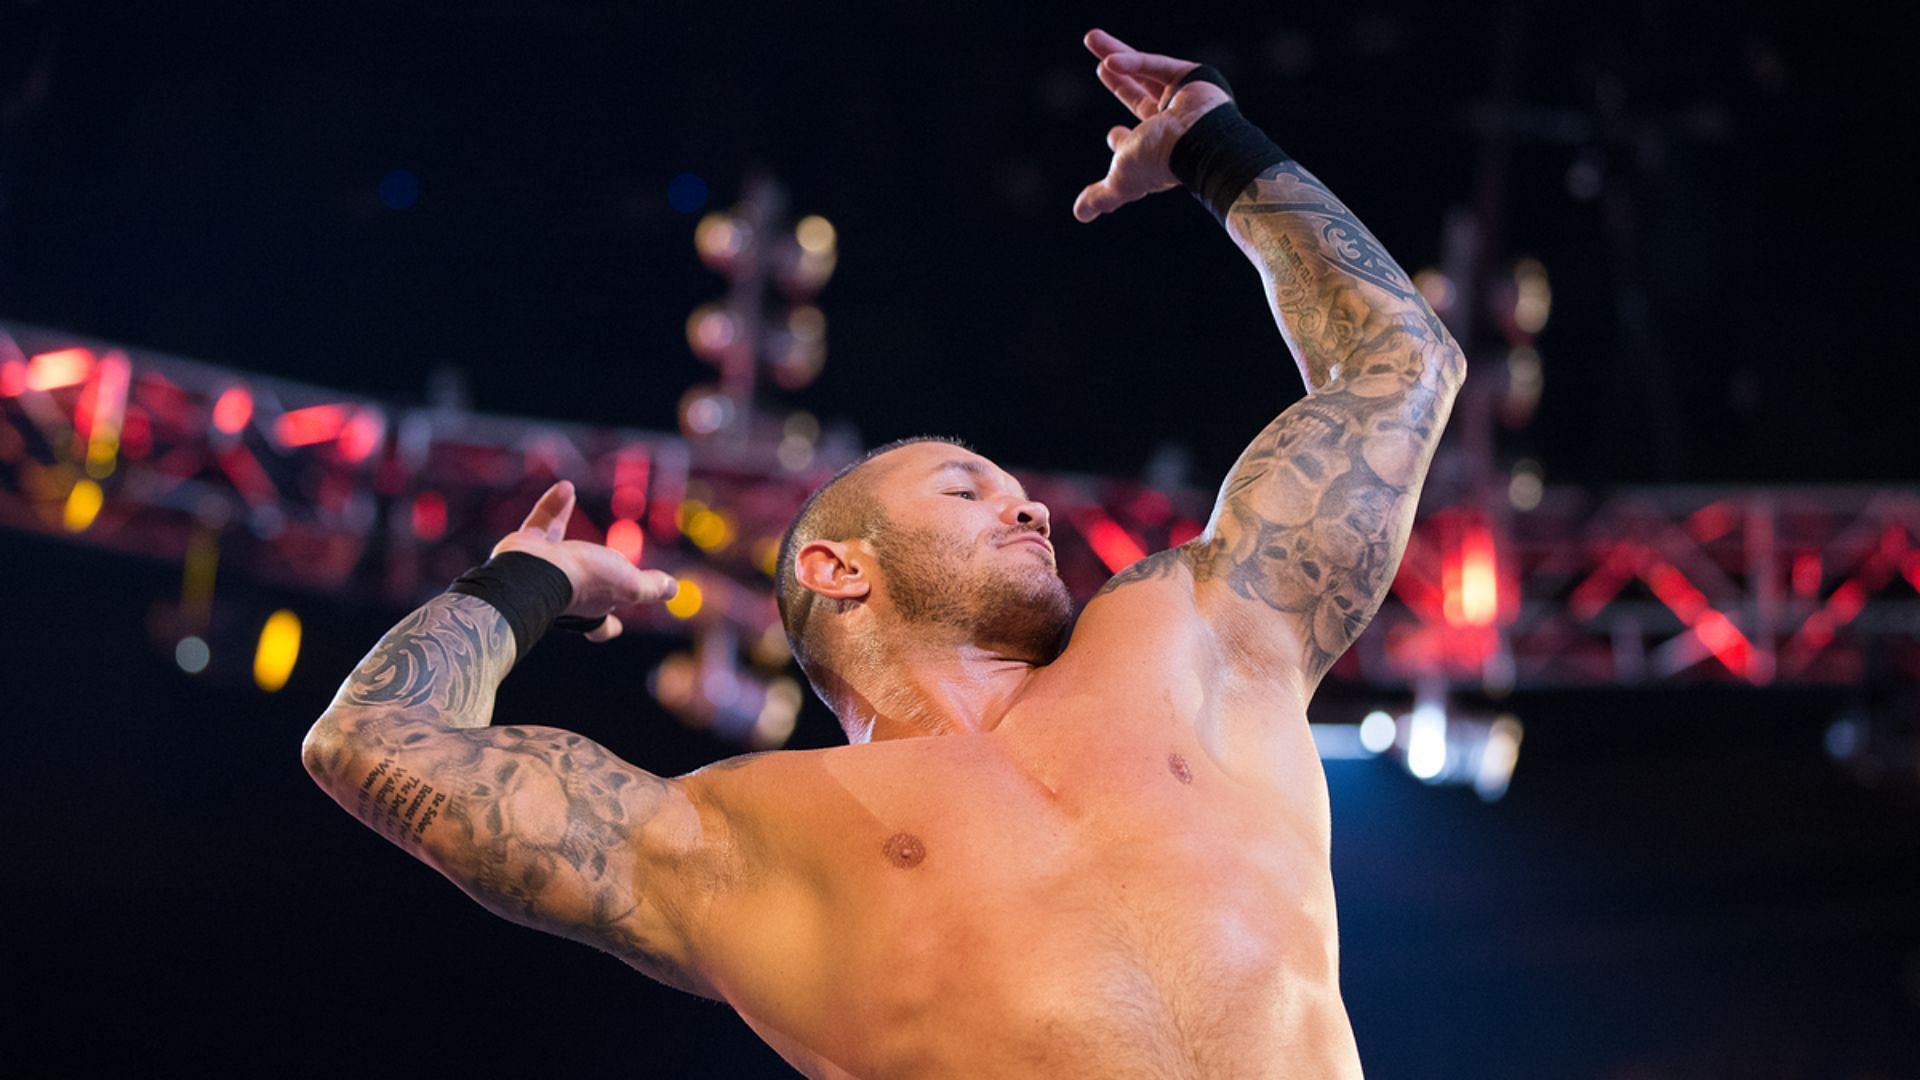 Randy Orton has been out of action since May 2022